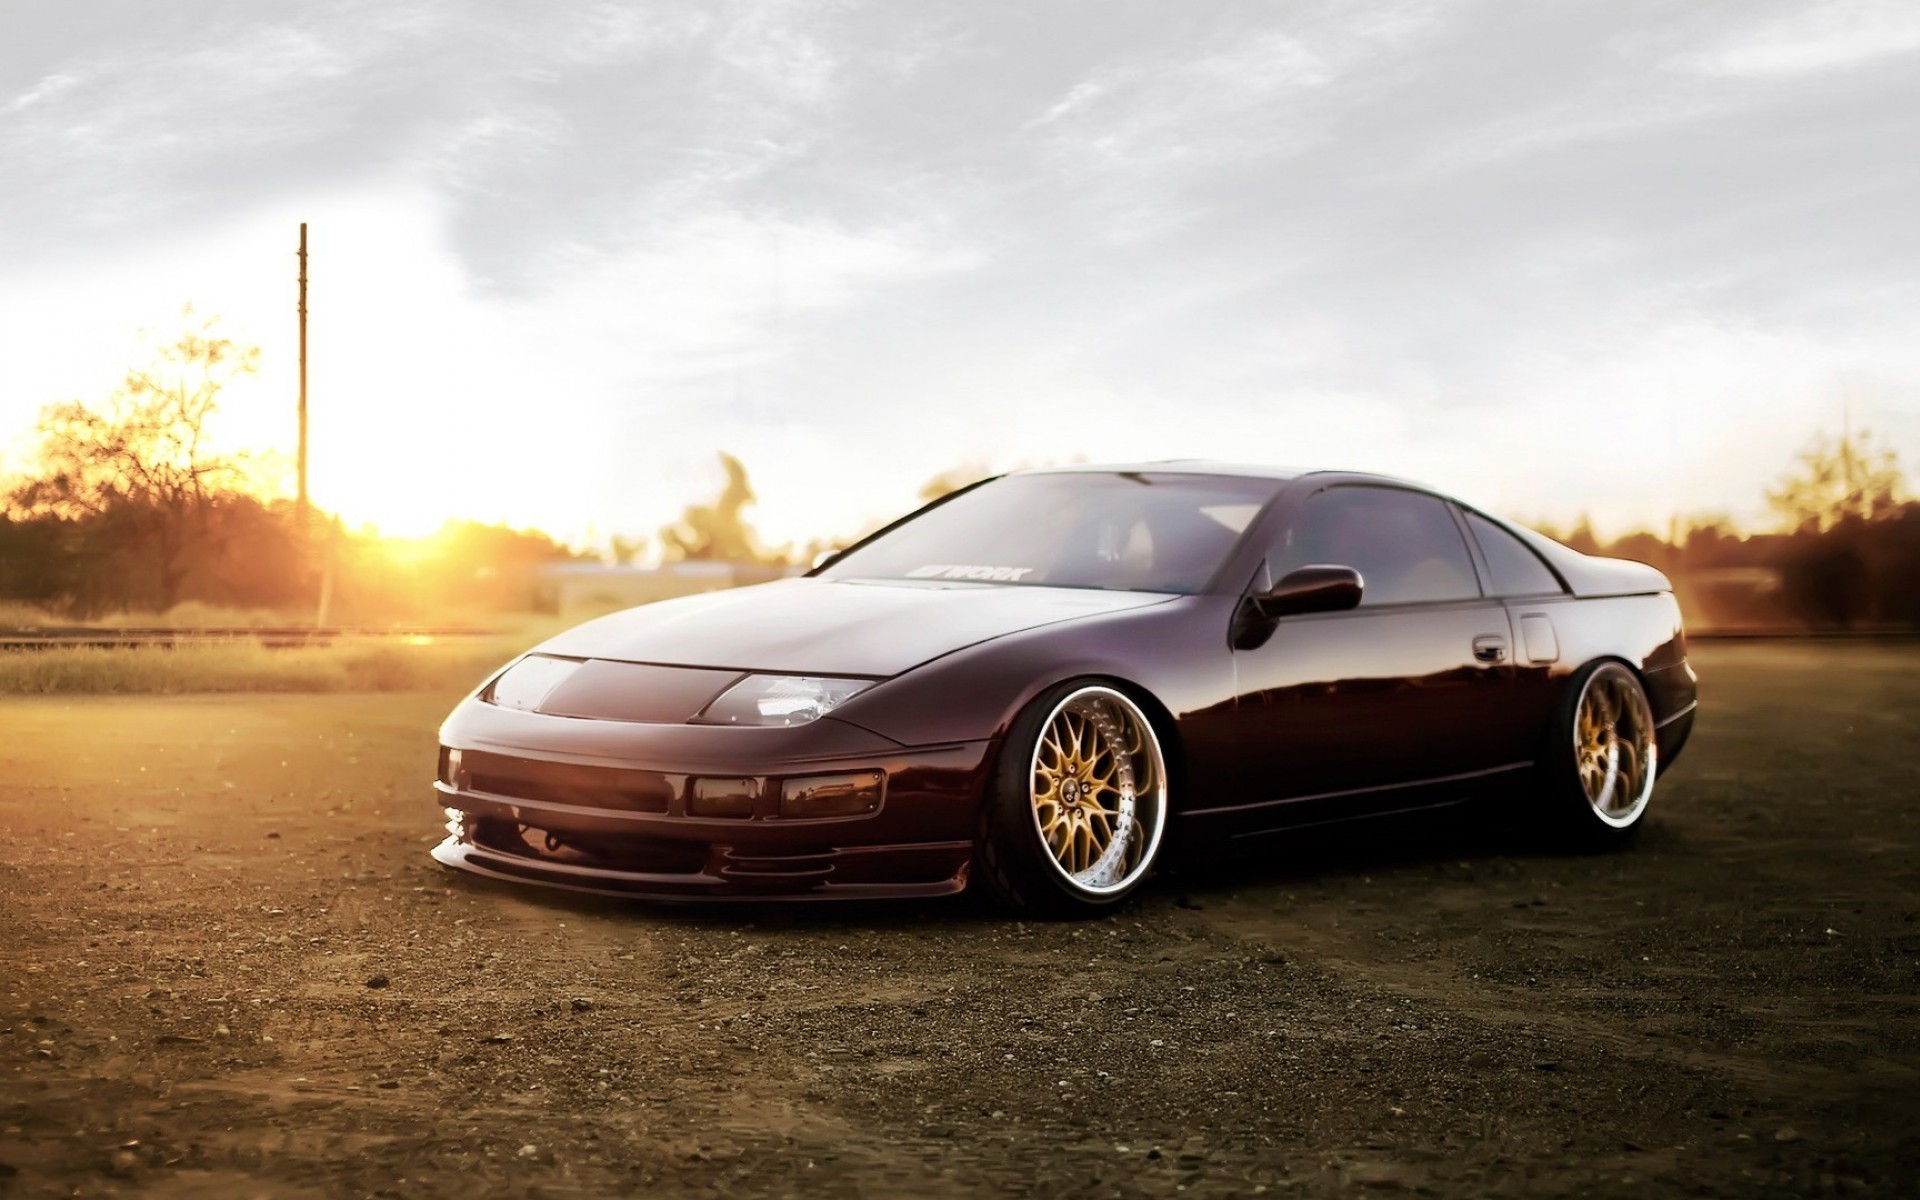 Stance Nissan Nissan 300ZX Car Nissan Fairlady Z Front Angle View Sunlight 1920x1200